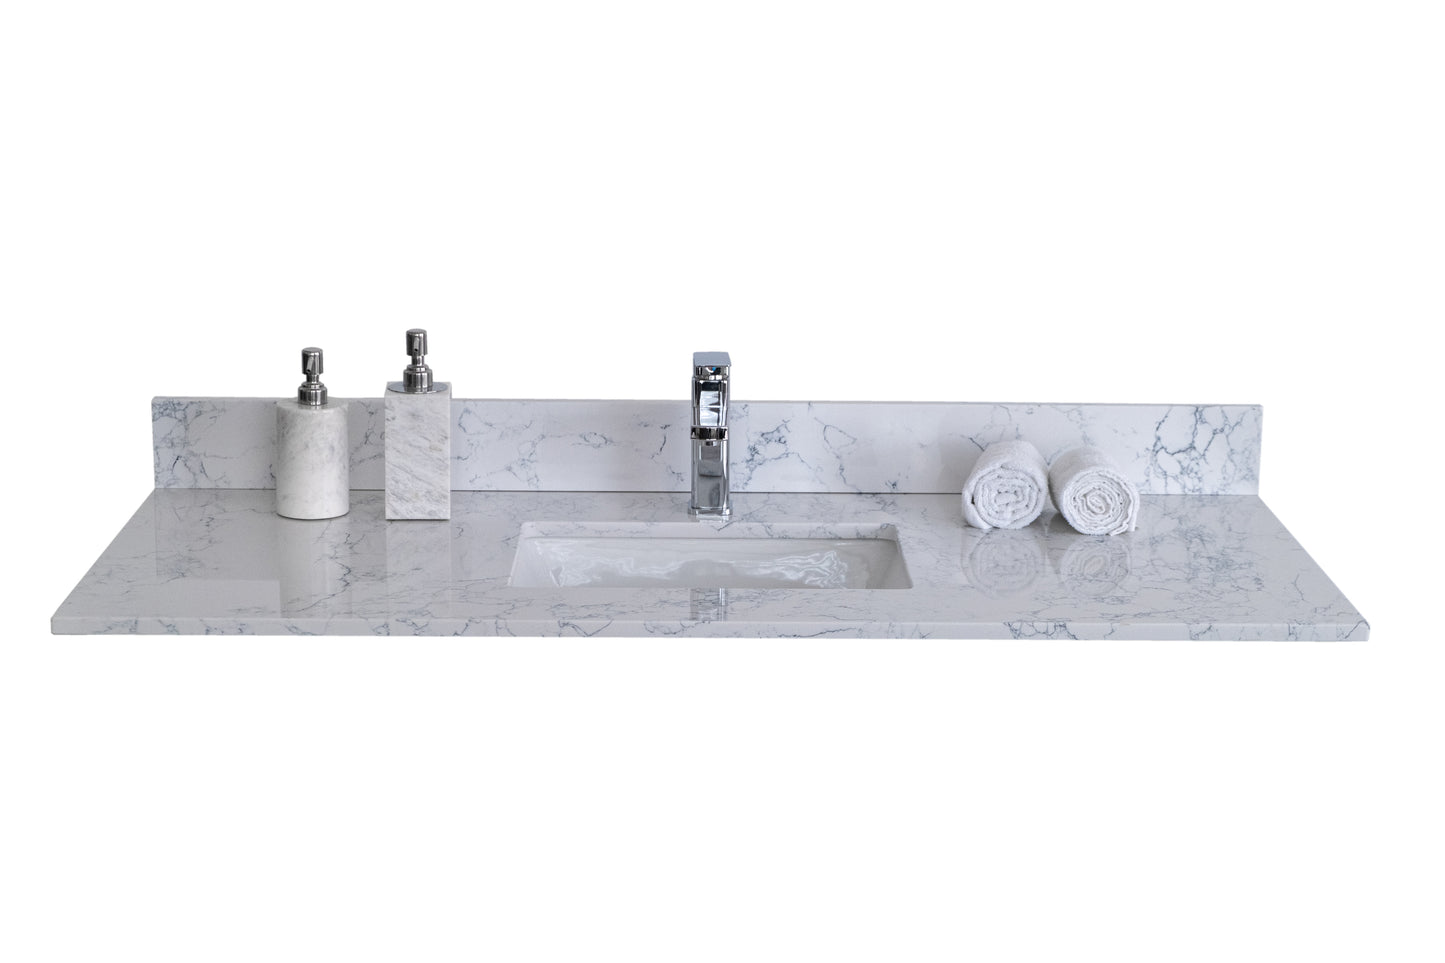 Montary 31"x 22" bathroom stone vanity top Carrara  jade engineered marble color with undermount ceramic sink and single faucet hole with backsplash